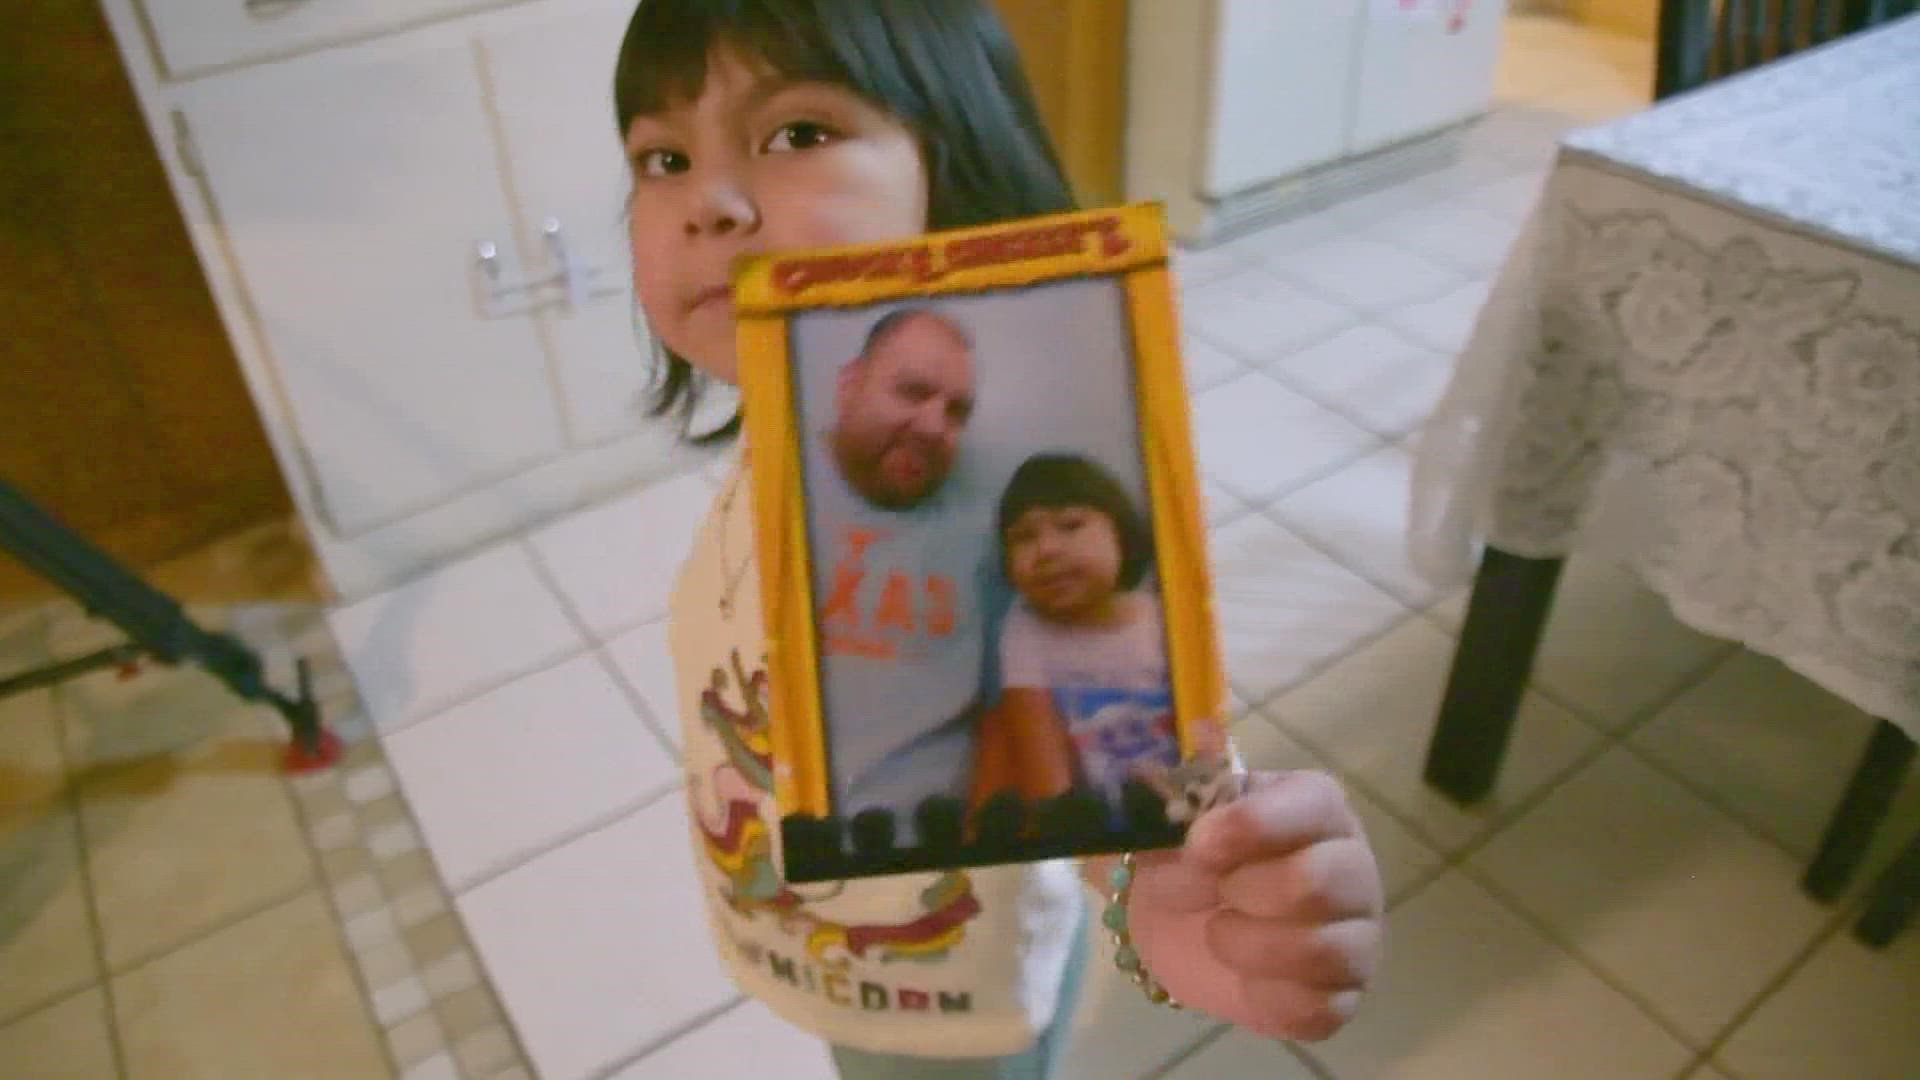 Emerie Servantes is five years old, and her mom and dad passed away within months of each other.